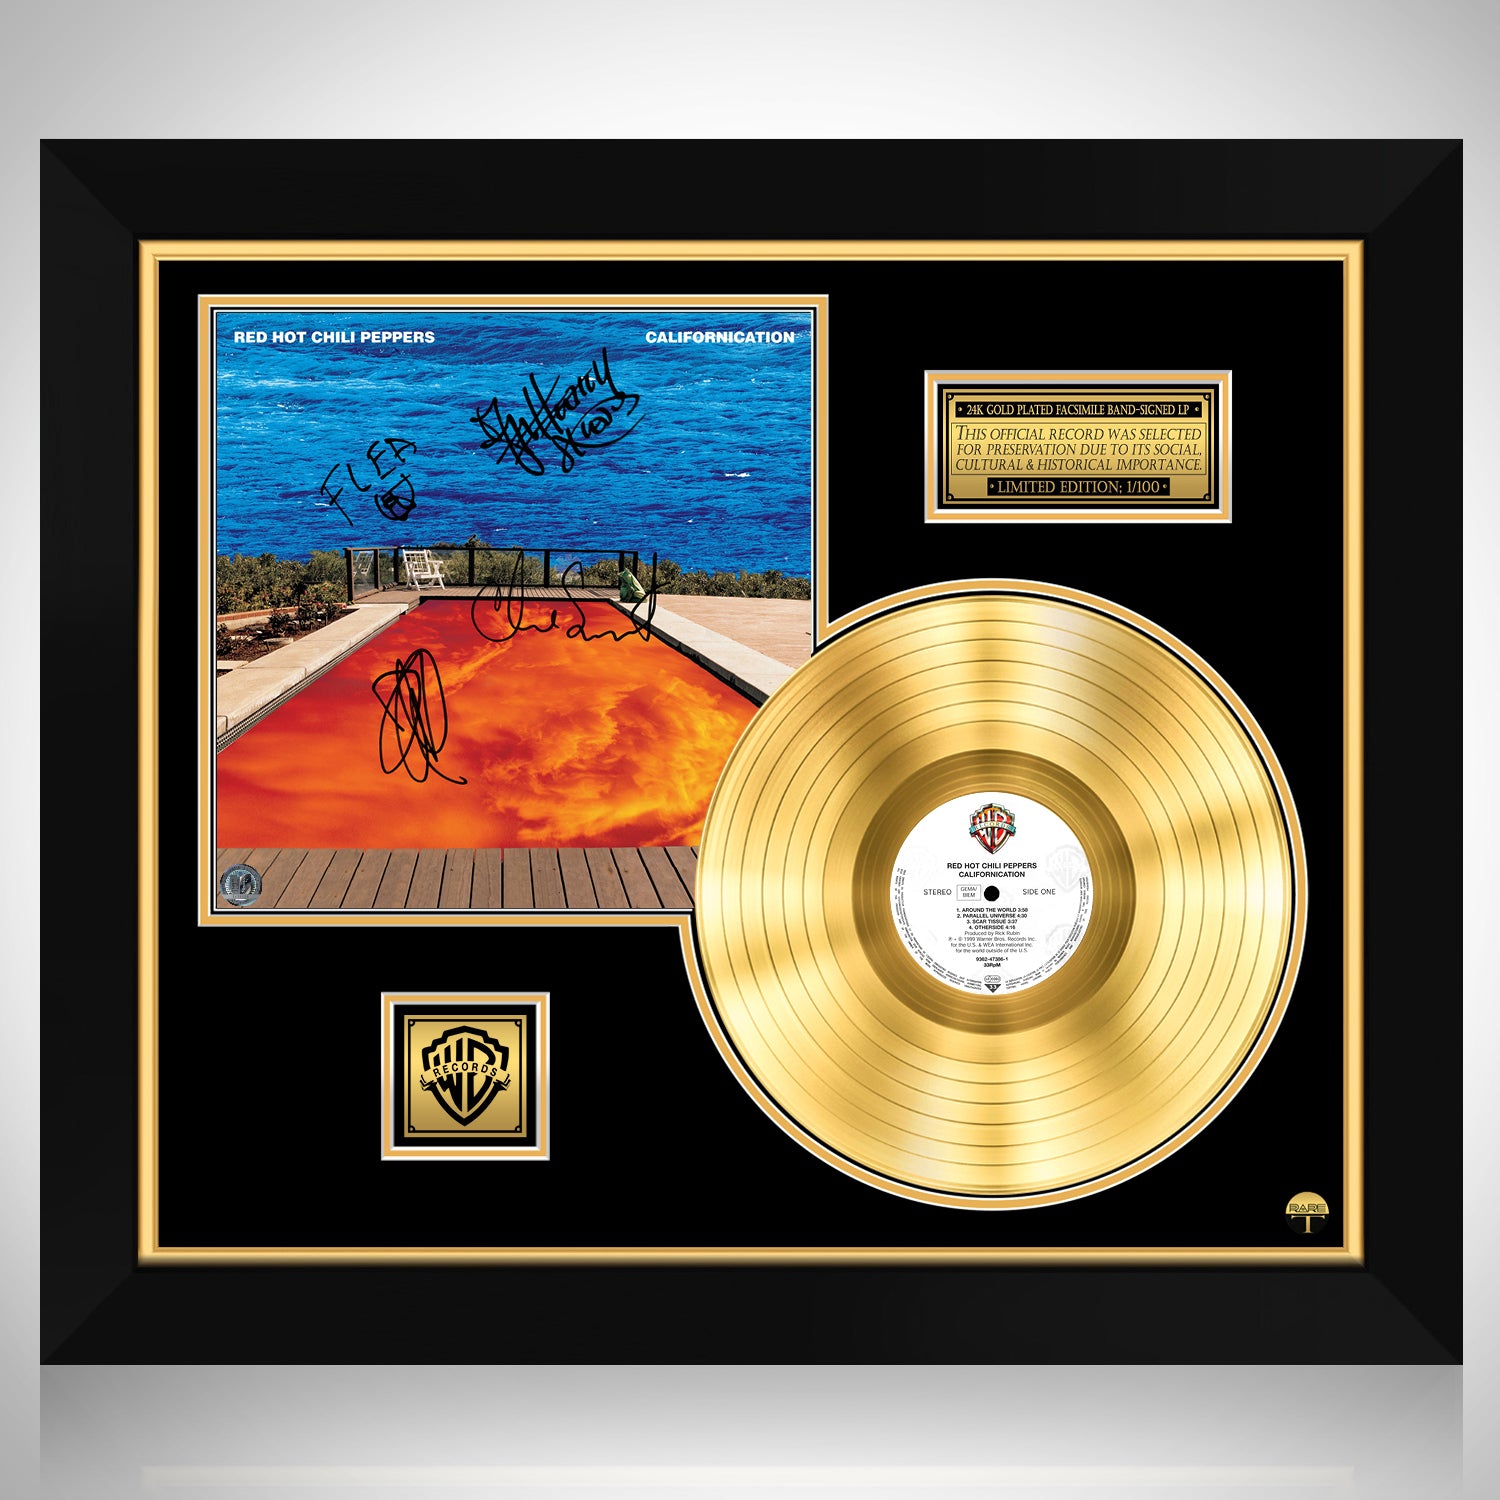 Red Hot Chili Peppers - Californication Gold LP Limited Signature Edition  Custom Frame